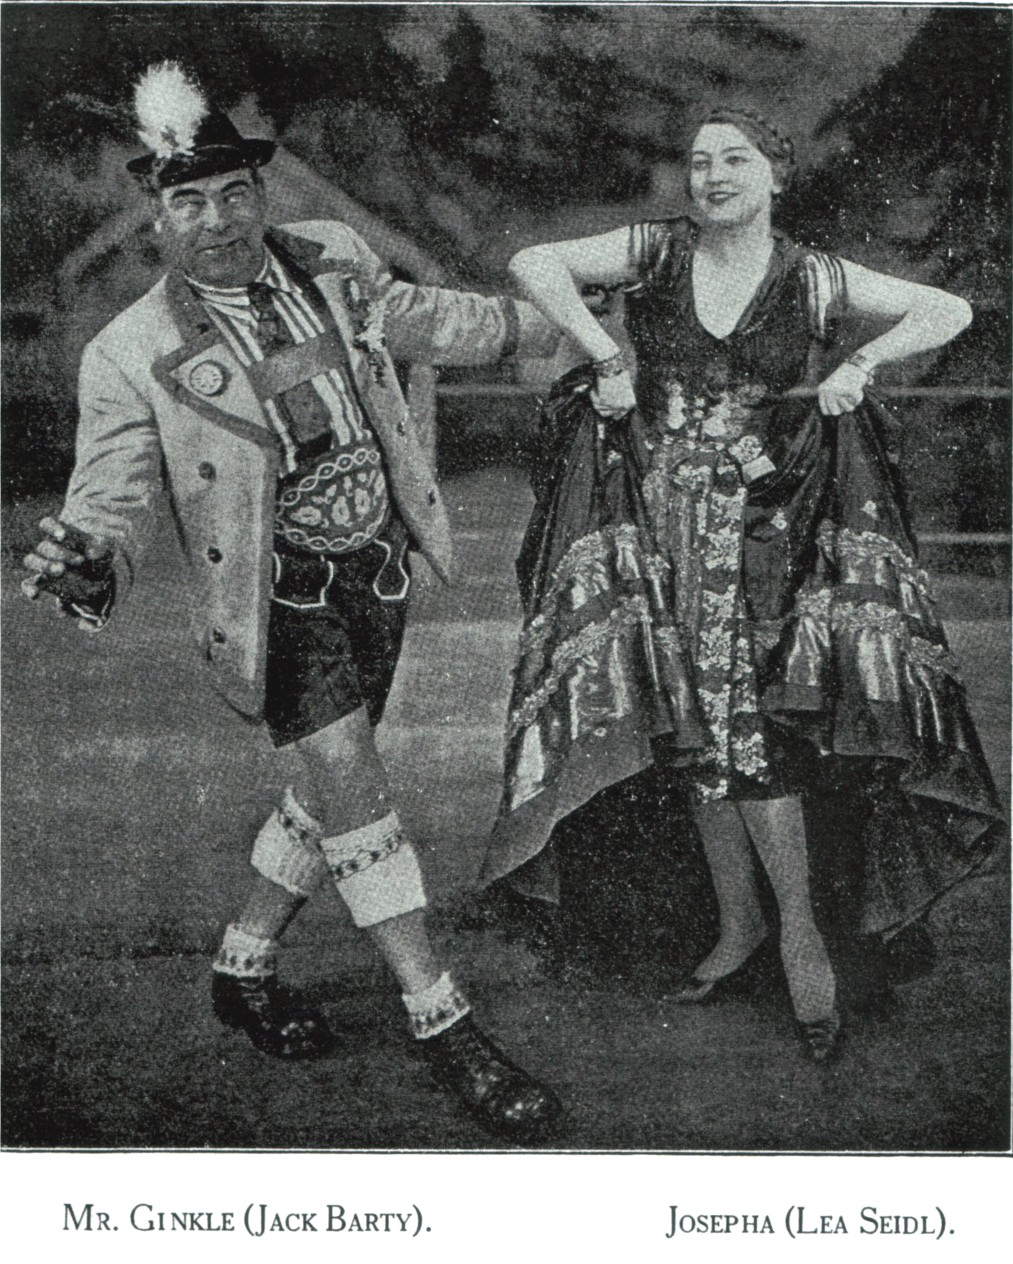 Lea Seidl demonstrating how to properly dress and dance in an Alpine setting.